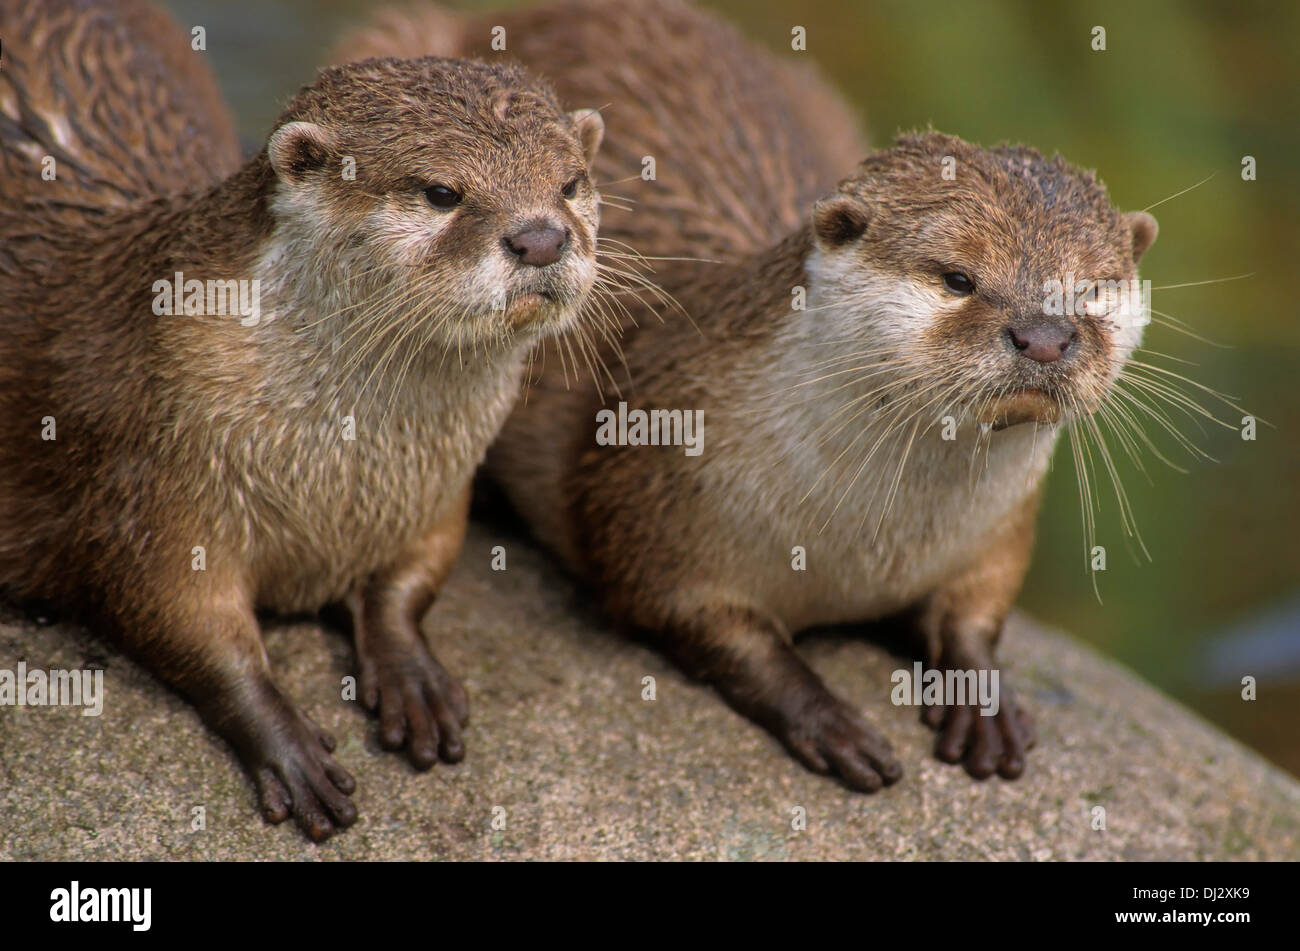 oriental small-clawed otter (Aonyx cinerea), Asian small-clawed otter, Zwergotter (Aonyx cinerea), Kurzkrallenotter Stock Photo